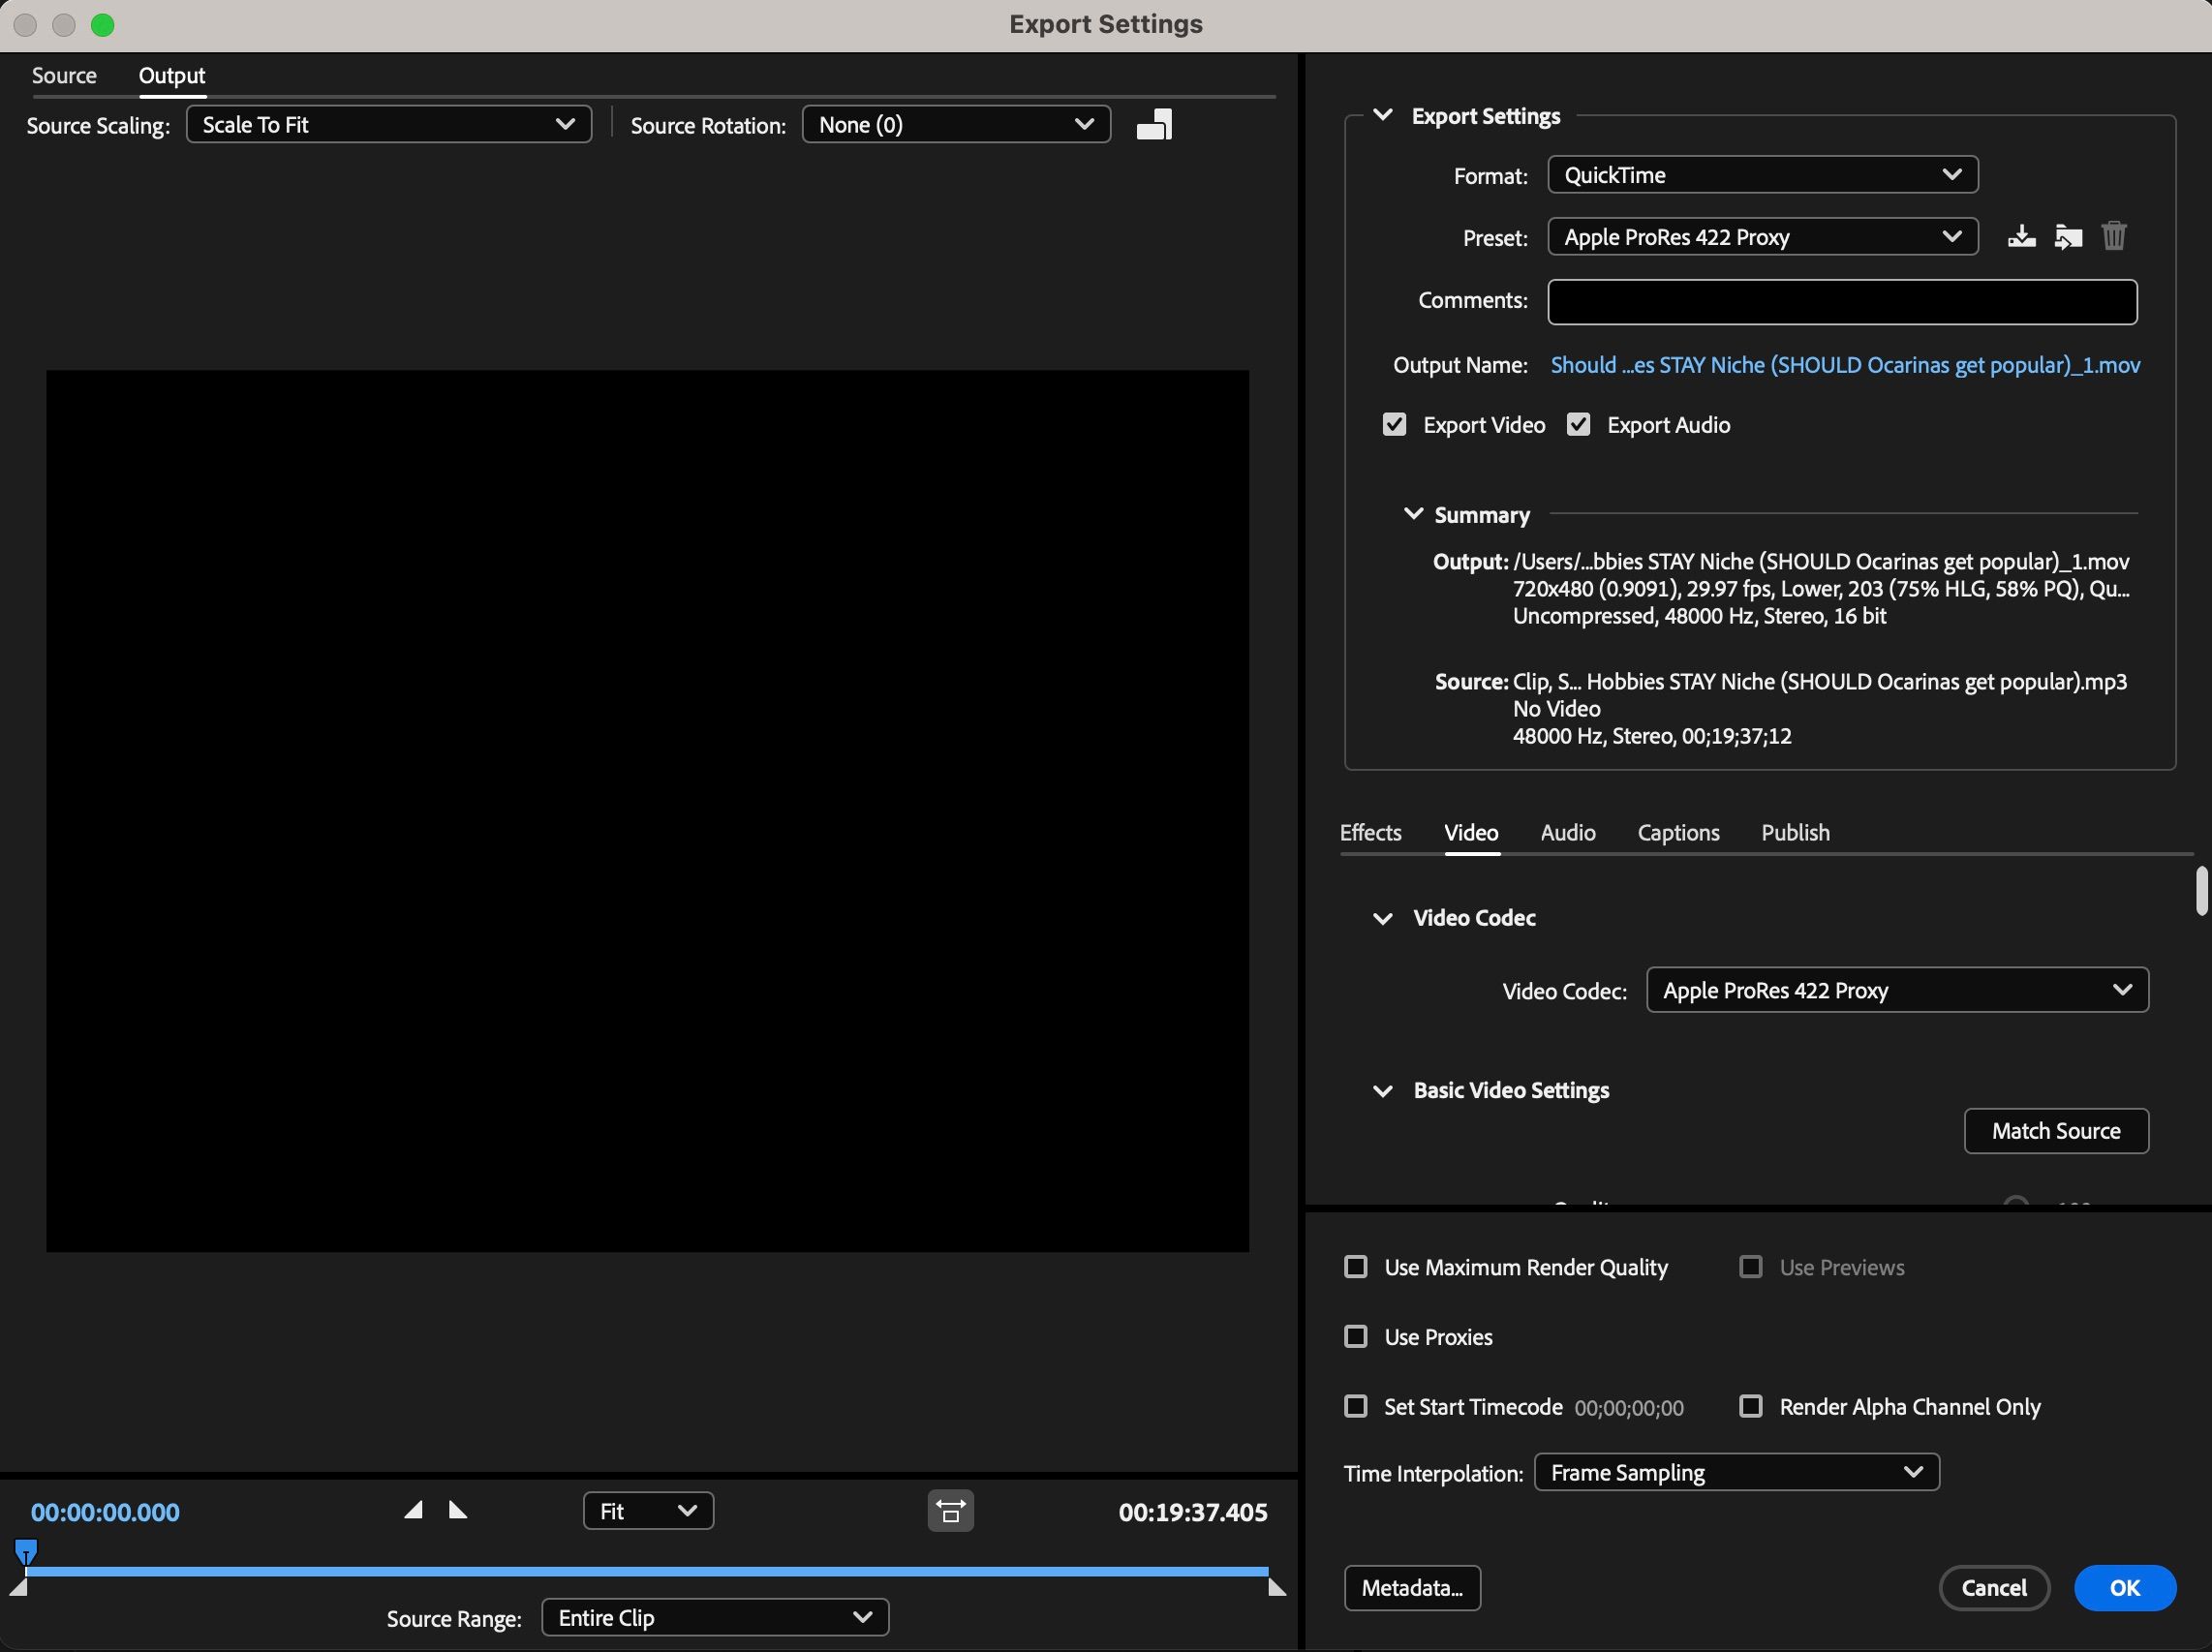 Adobe Media Encoder settings to create a dummy video out of marked audio